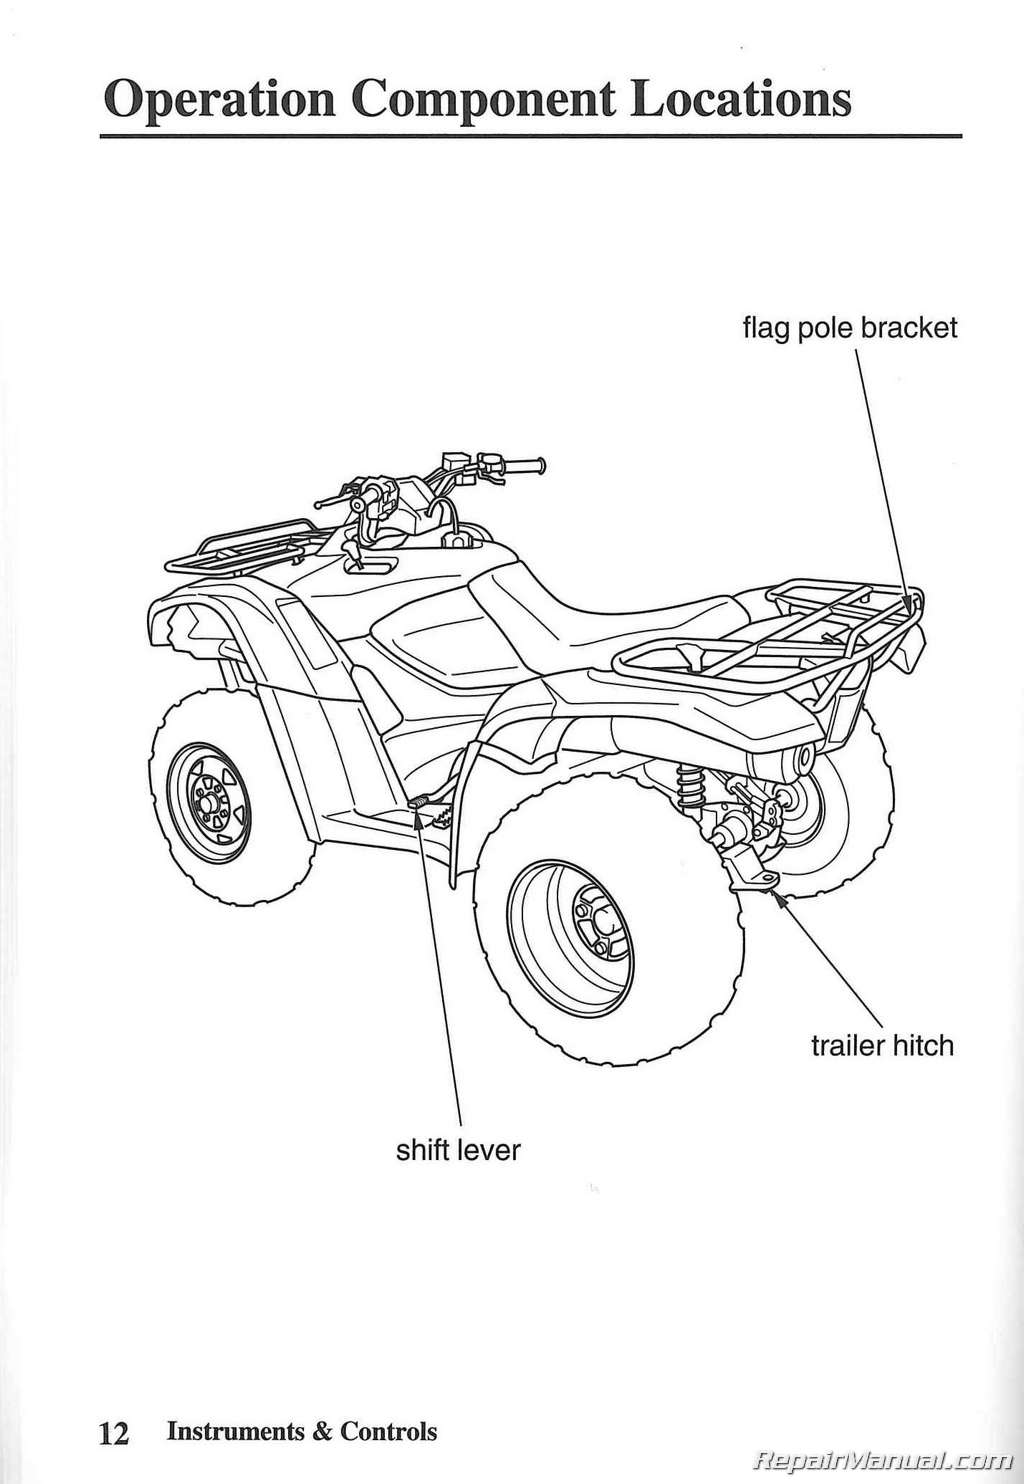 Location of number on honda rancher #2